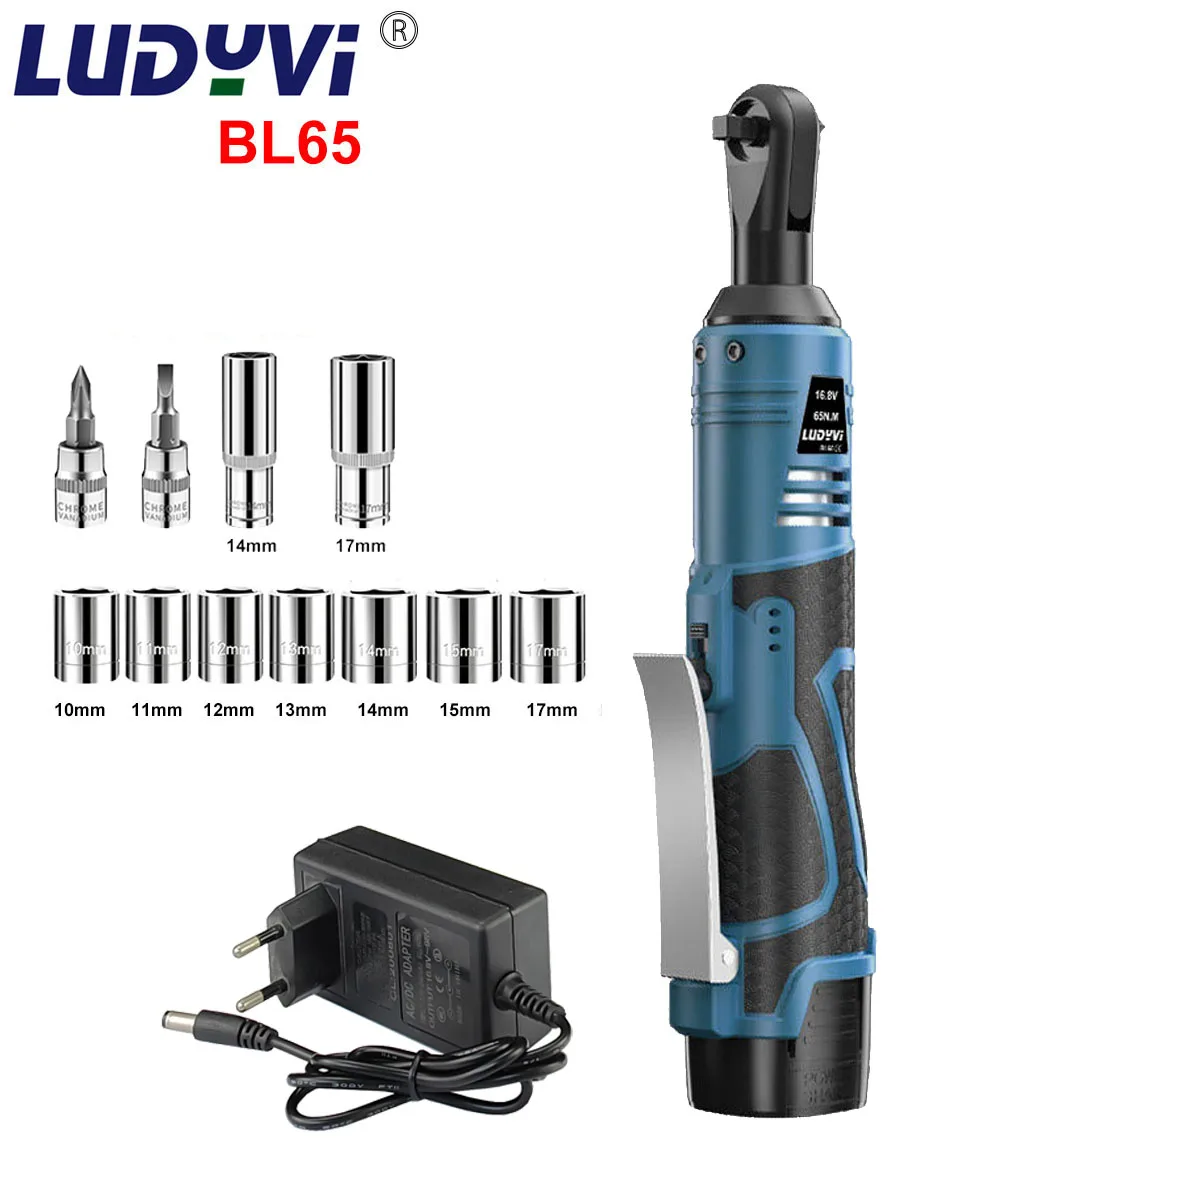 65NM Cordless Electric Wrench 16.8V 3/8 Ratchet Wrench Set Angle Screwdriver to Removal Screw Nut Car Repair Tool